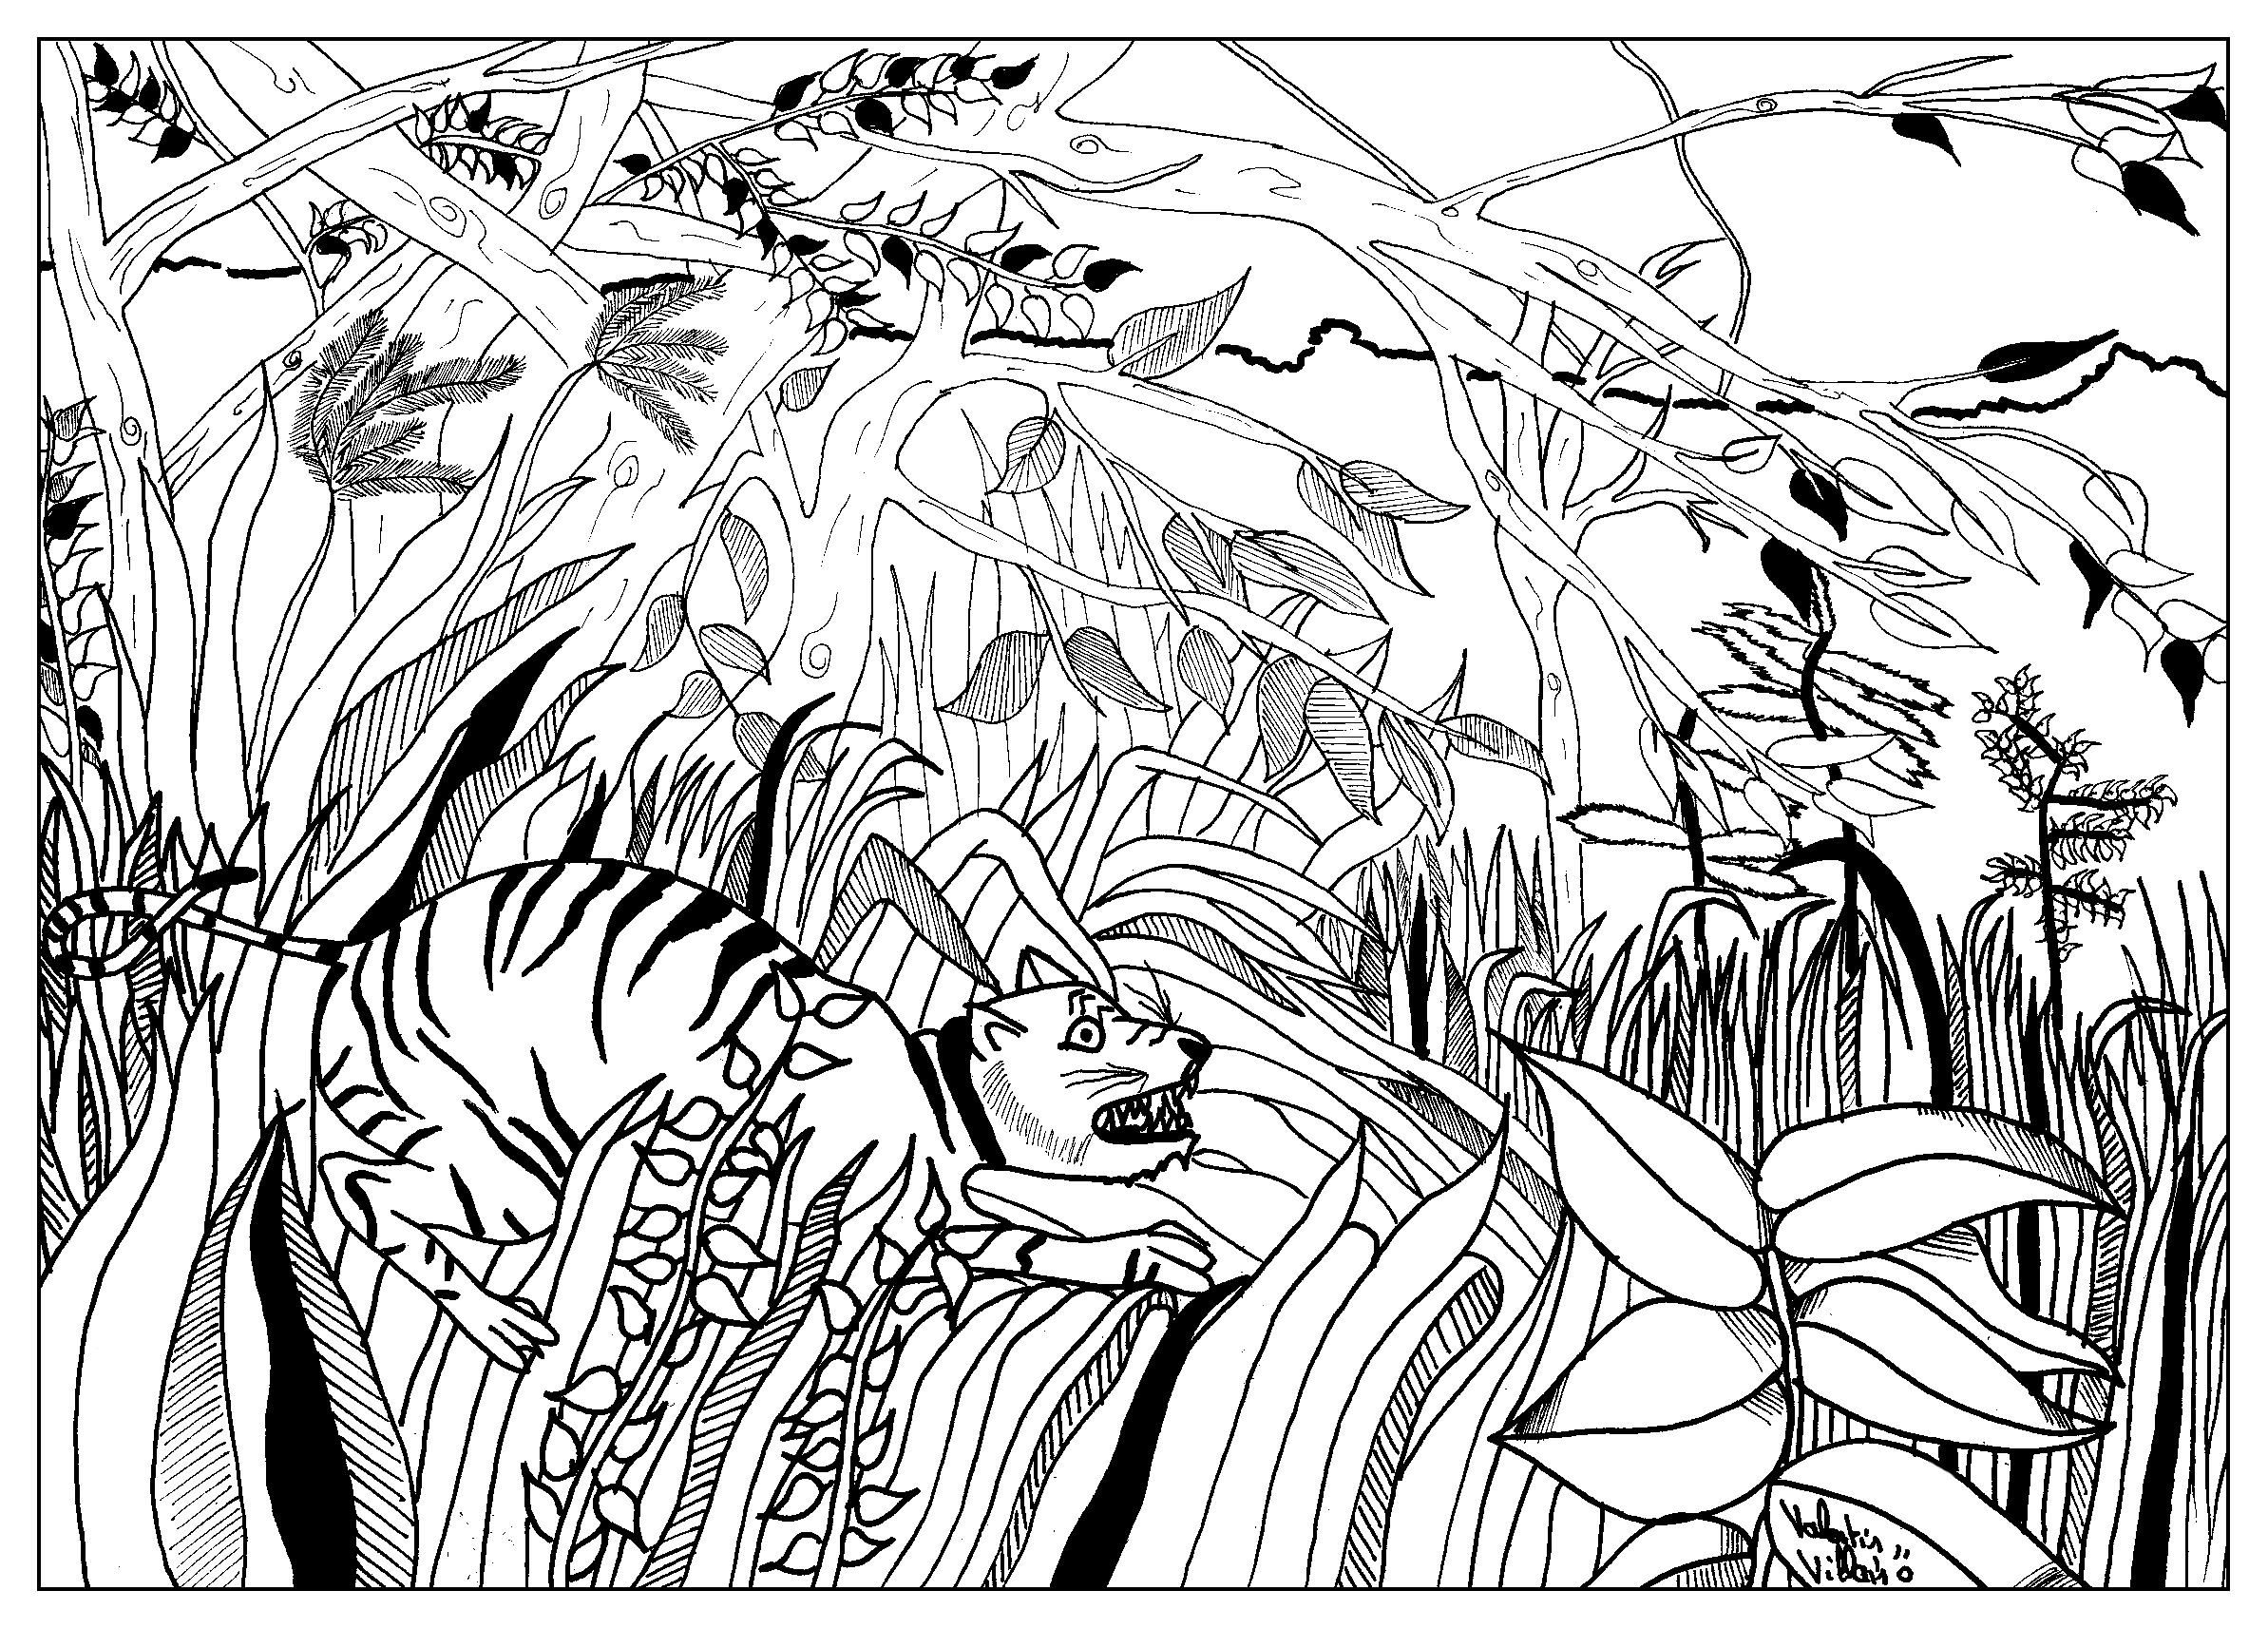 Coloring page inspired by 'Surpris !' by French artist Henri Rousseau, Artist : Valentin